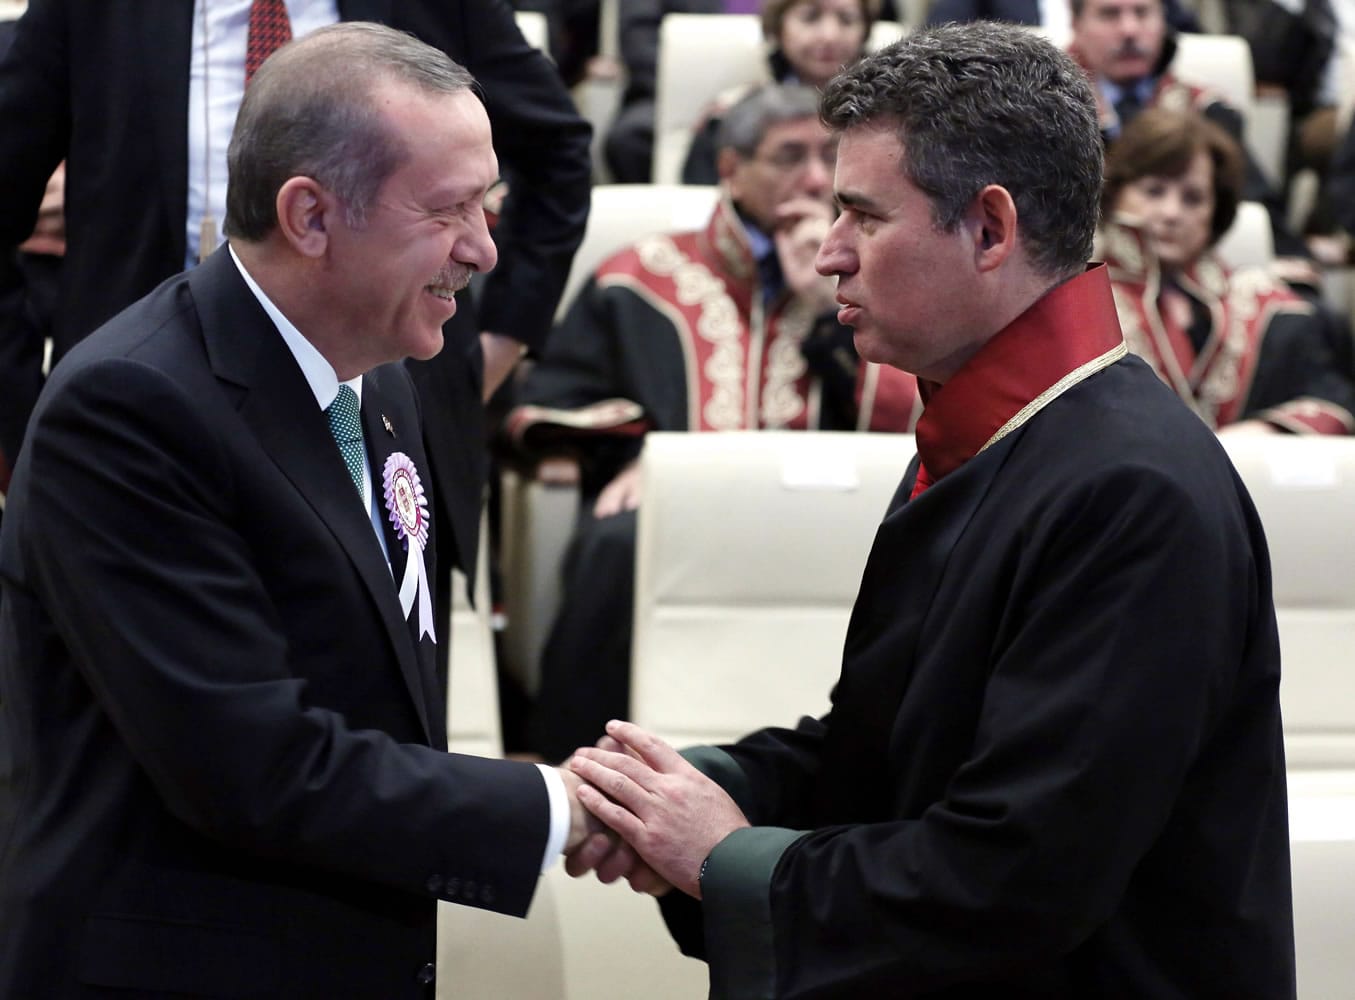 Turkish Prime Minister Recep Tayyip Erdogan, left, and Professor Metin Feyzioglu, chairman of of Turkey's Bar Associations, shake hands before a meeting in Ankara, Turkey, on Saturday, Erdogan interrupted Feyzioglu's critical speech and shouted at him before walking out the meeting: &quot; You are being rude!&quot;